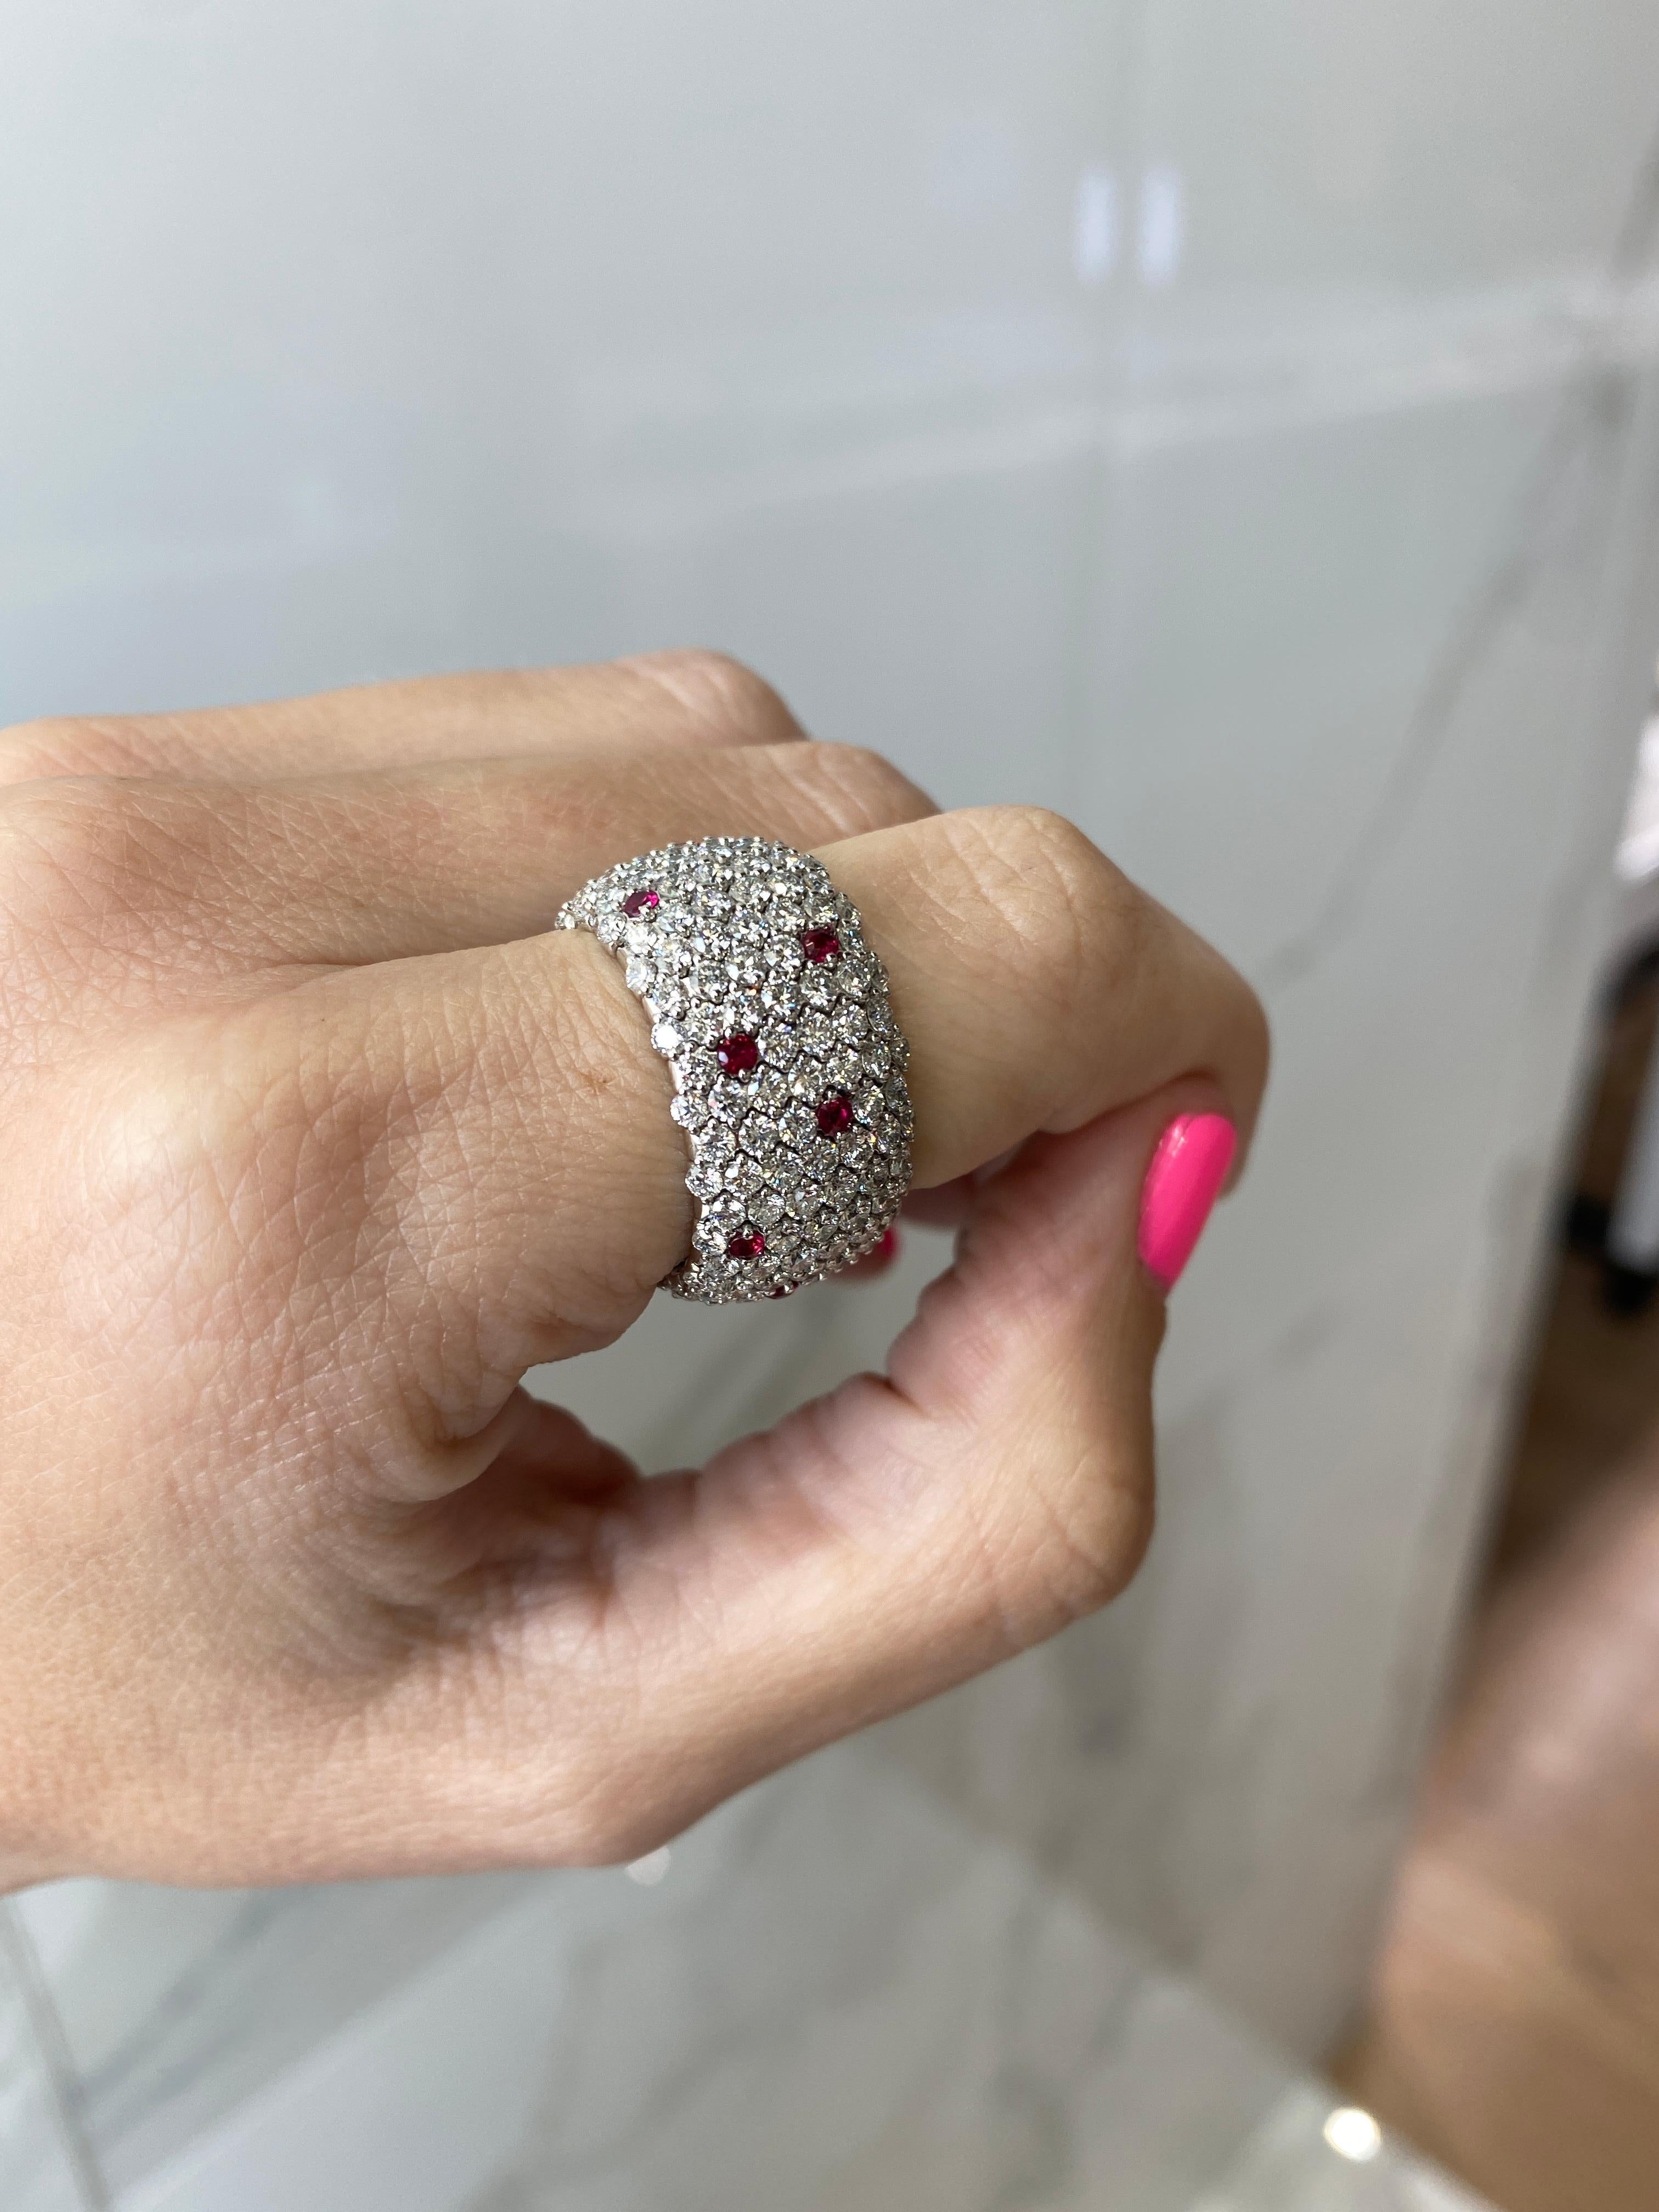 Zydo 5.85ctw Round Diamond & 0.41ctw Round Ruby 18k White Gold Stretch Band Ring In New Condition For Sale In Houston, TX